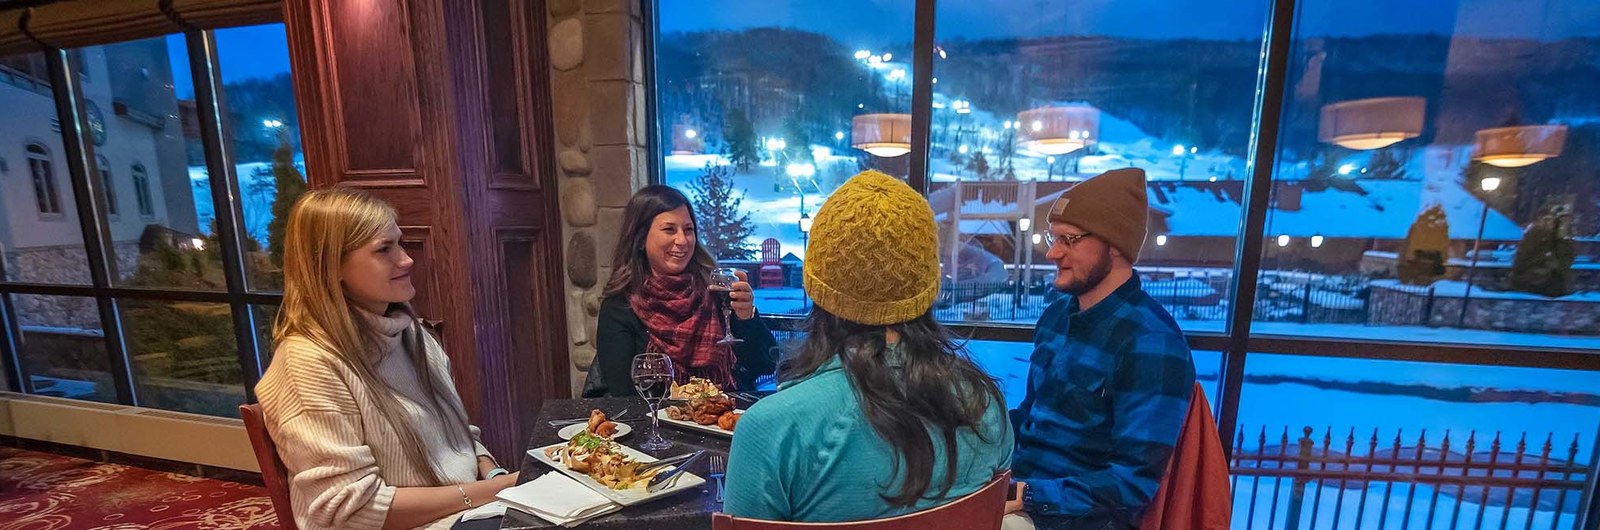 Four people eating at John Harvard's with the ski slopes in the background